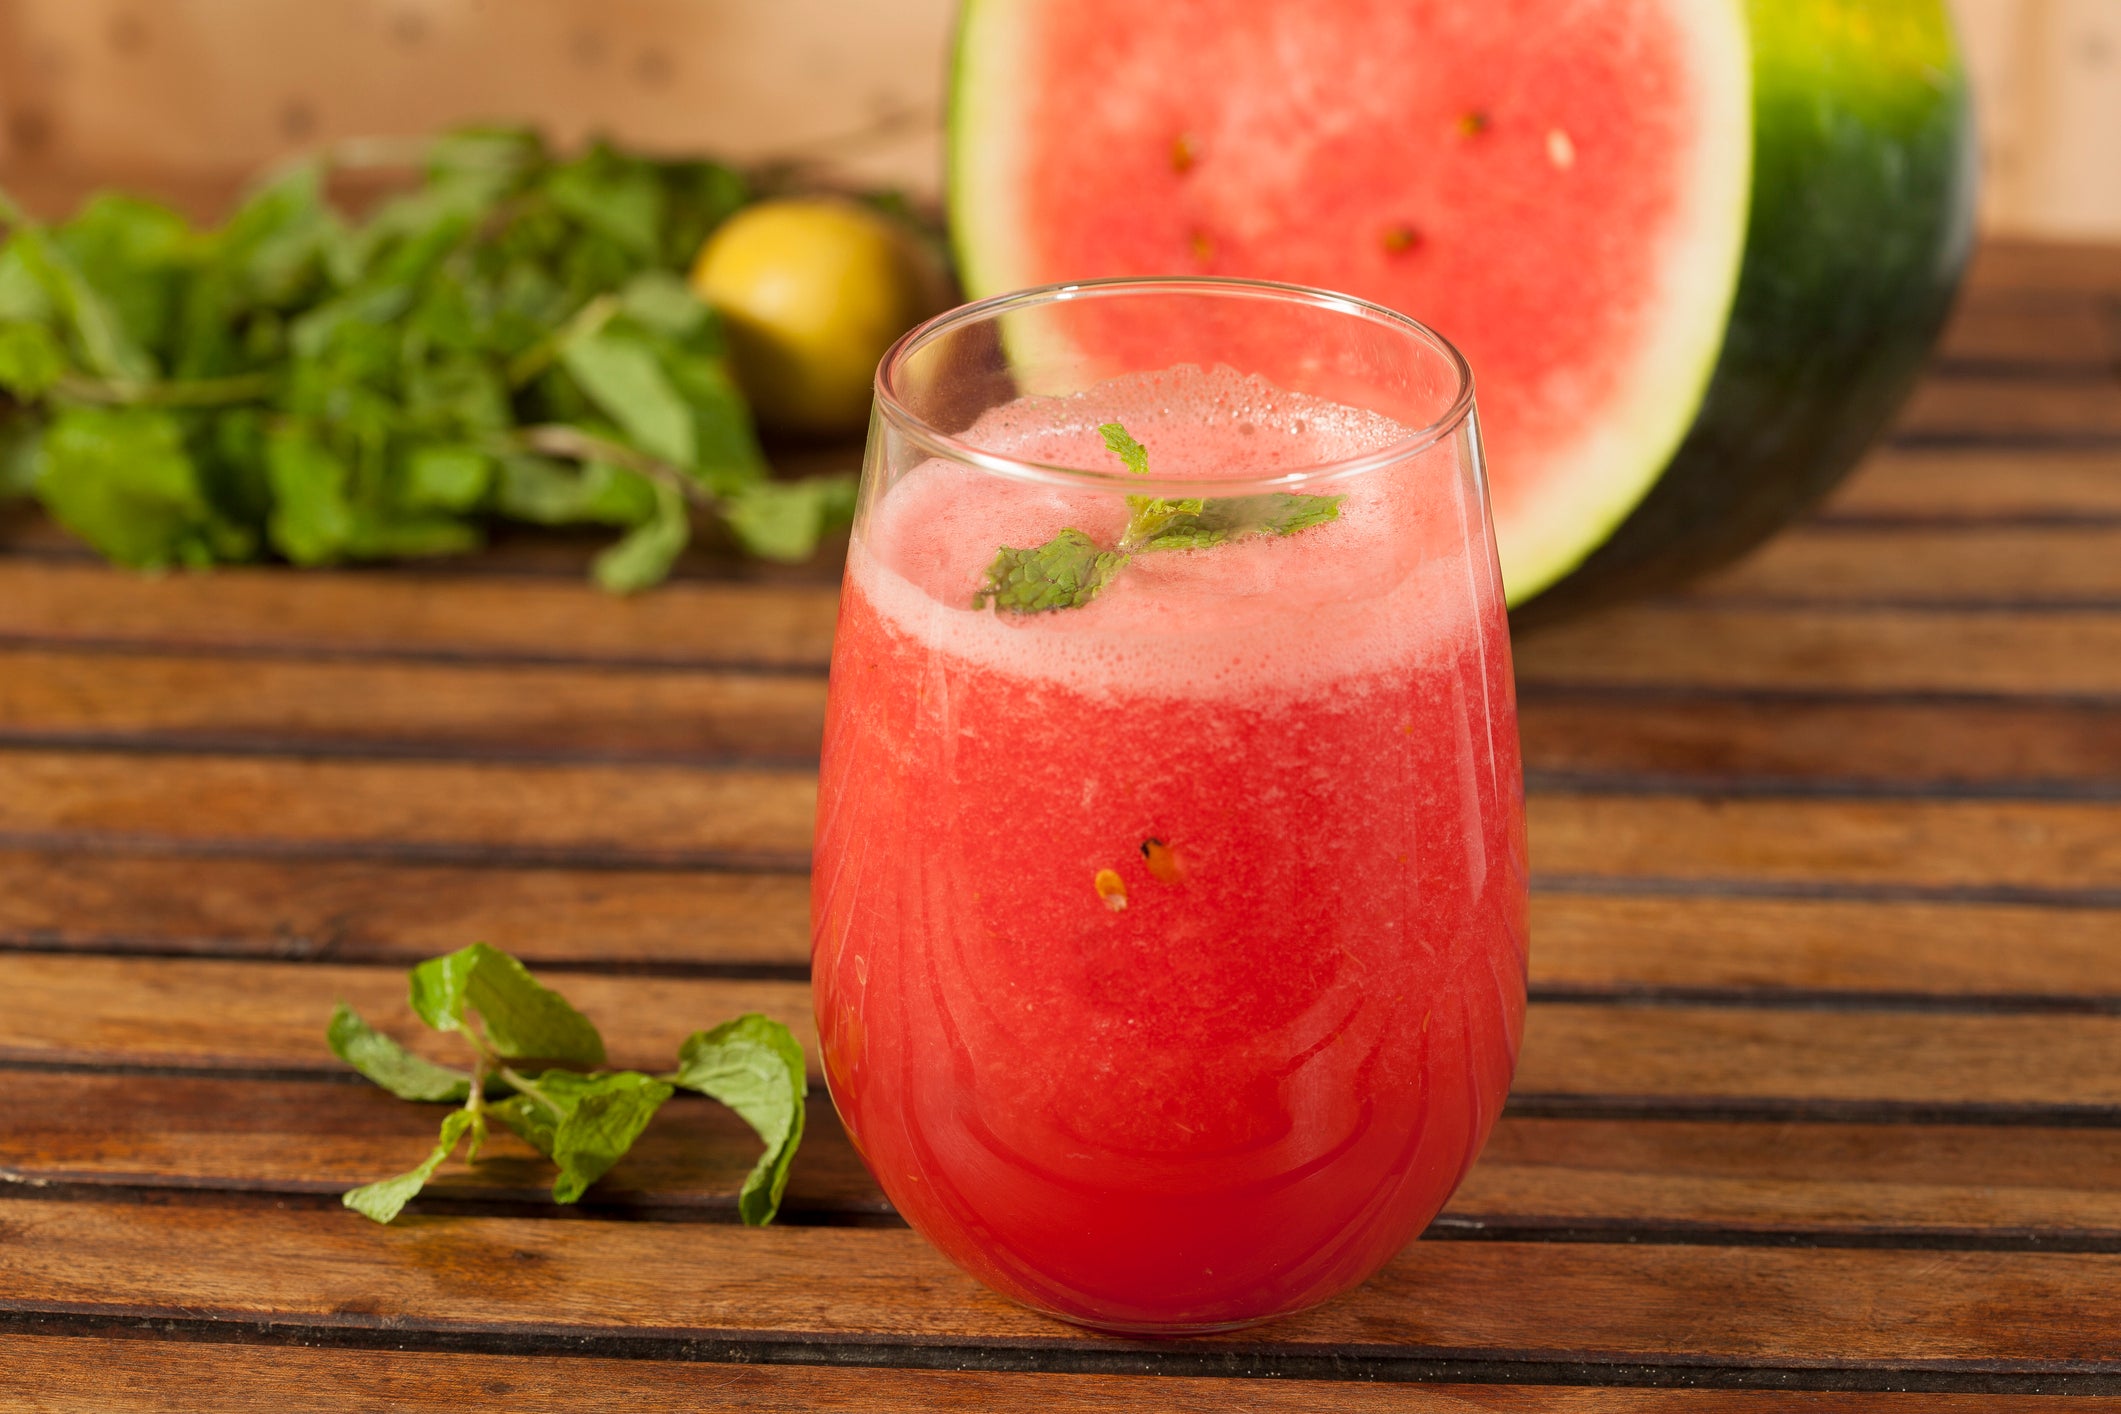 A glass of watermelon juice garnished with mint leaves